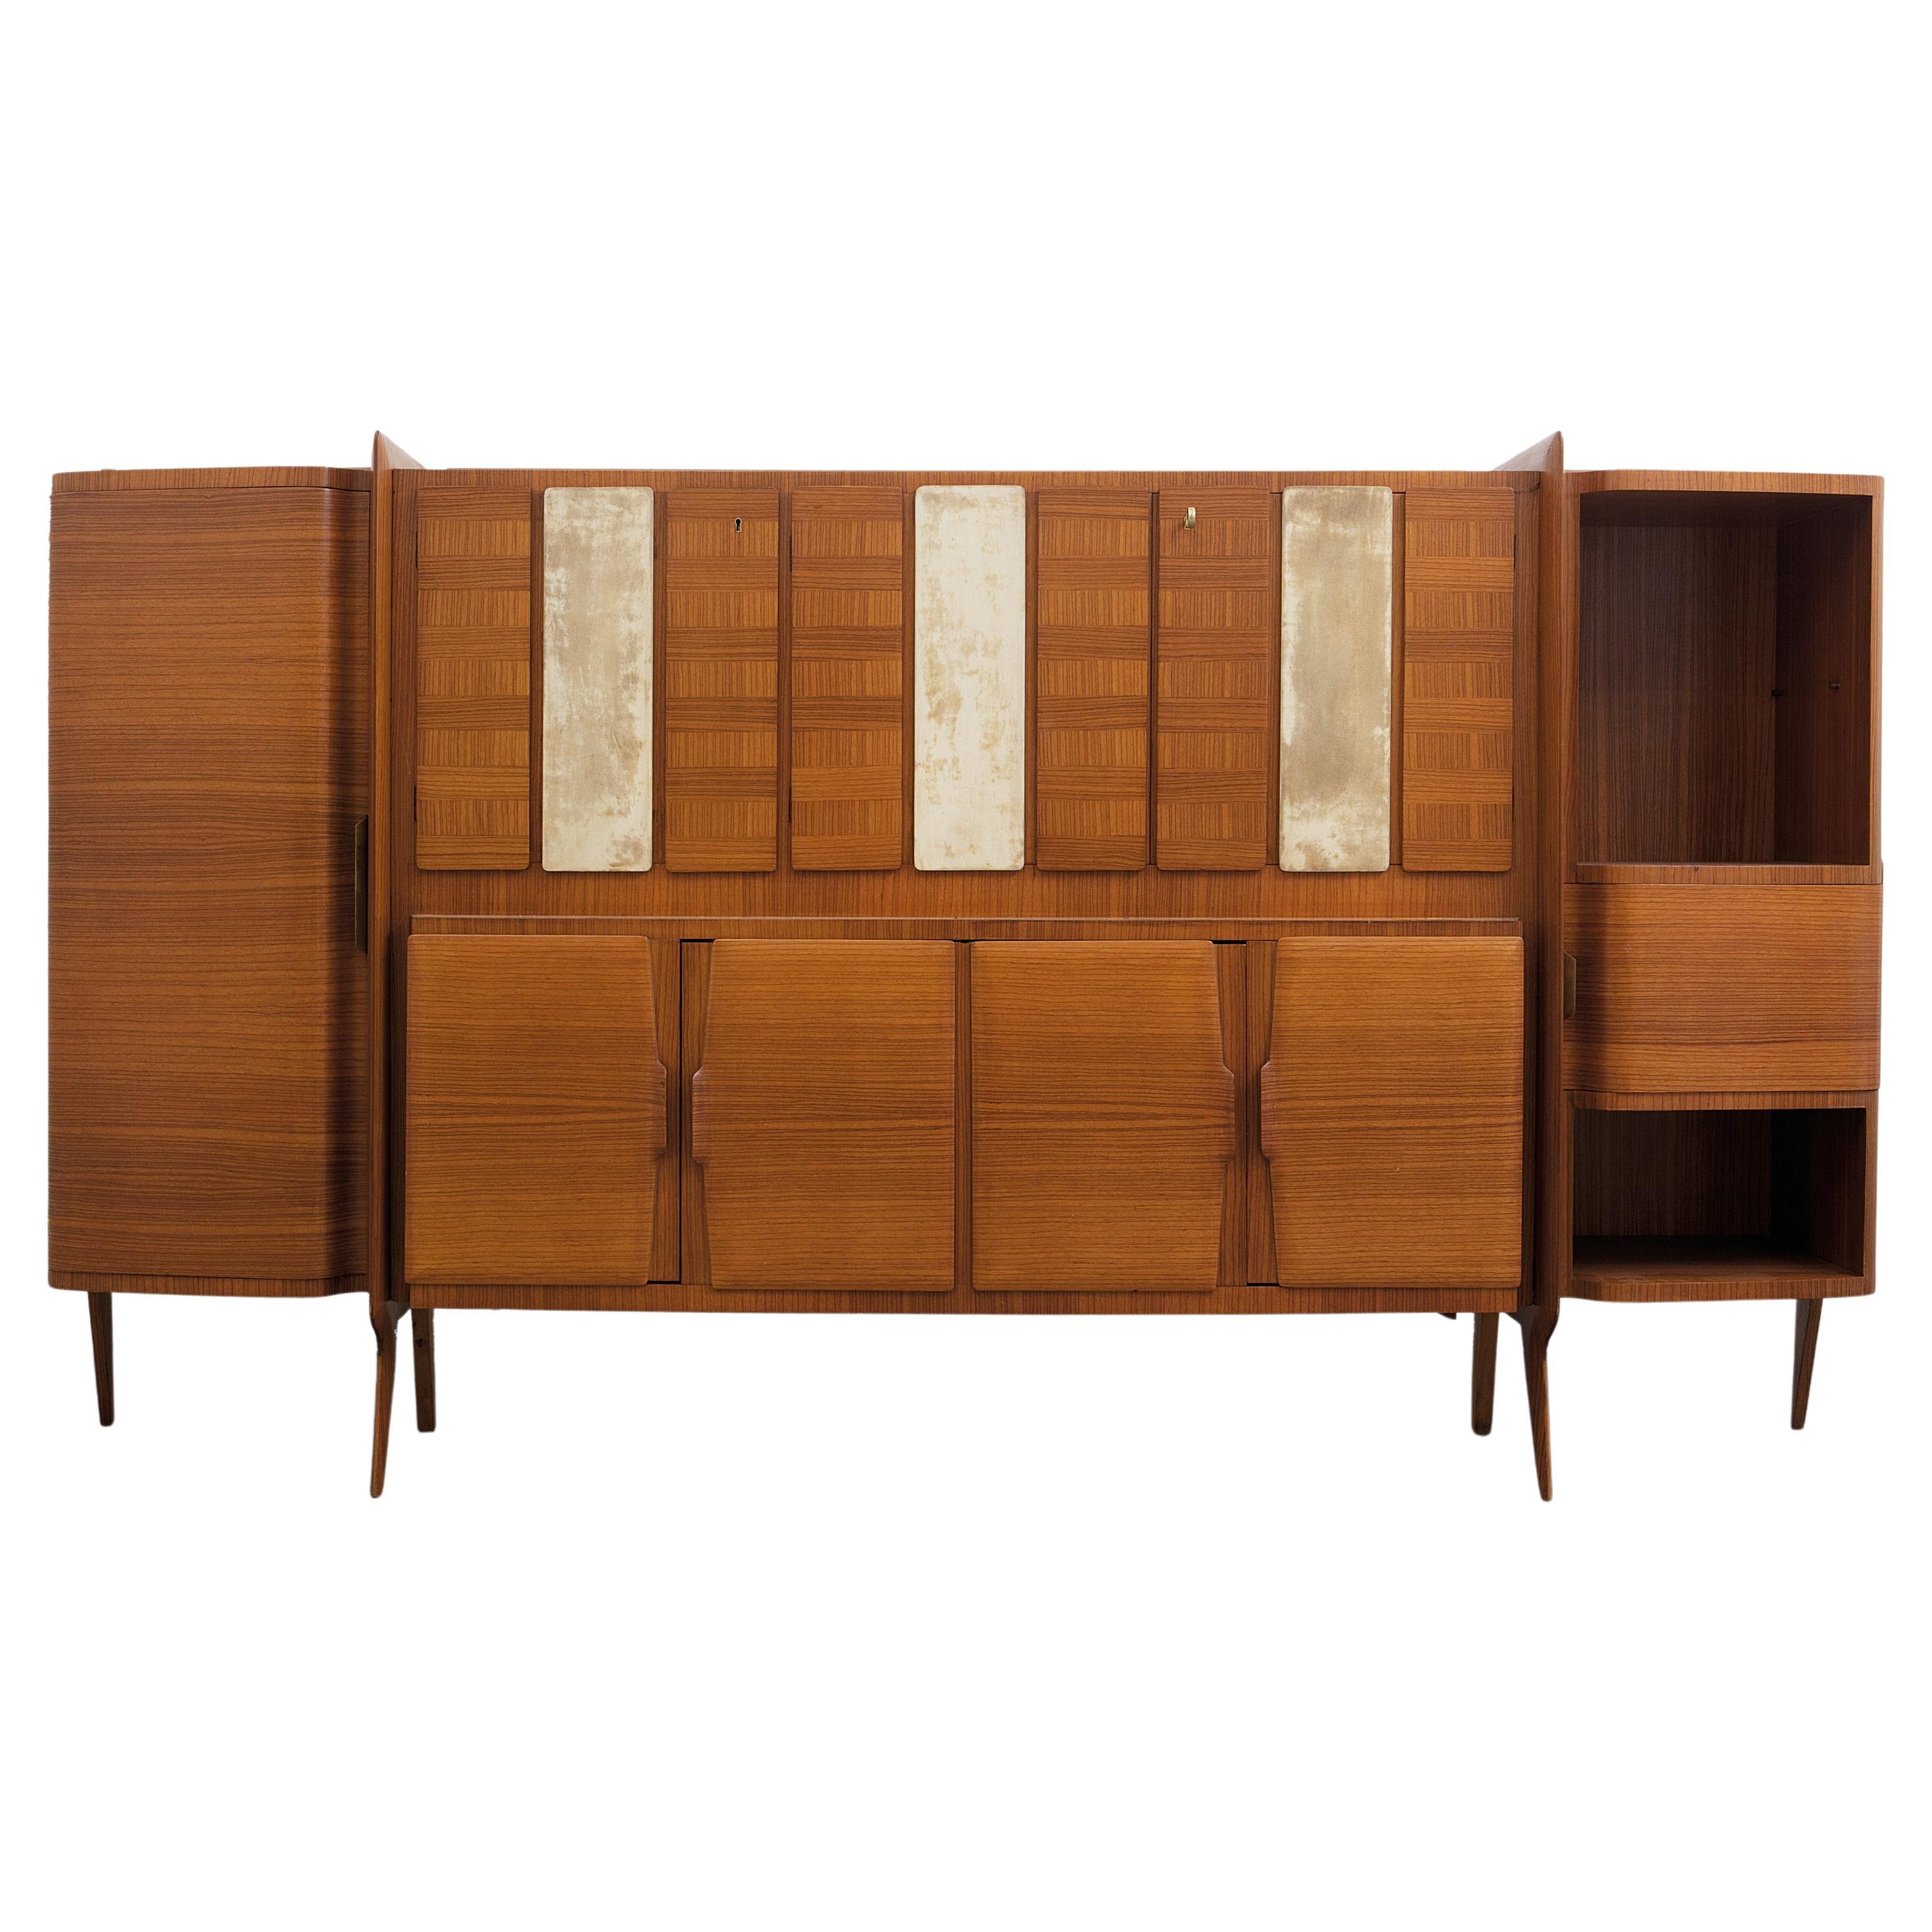 Monumental Wooden Cabinet with Parchment Panels by Gio Ponti, Italy